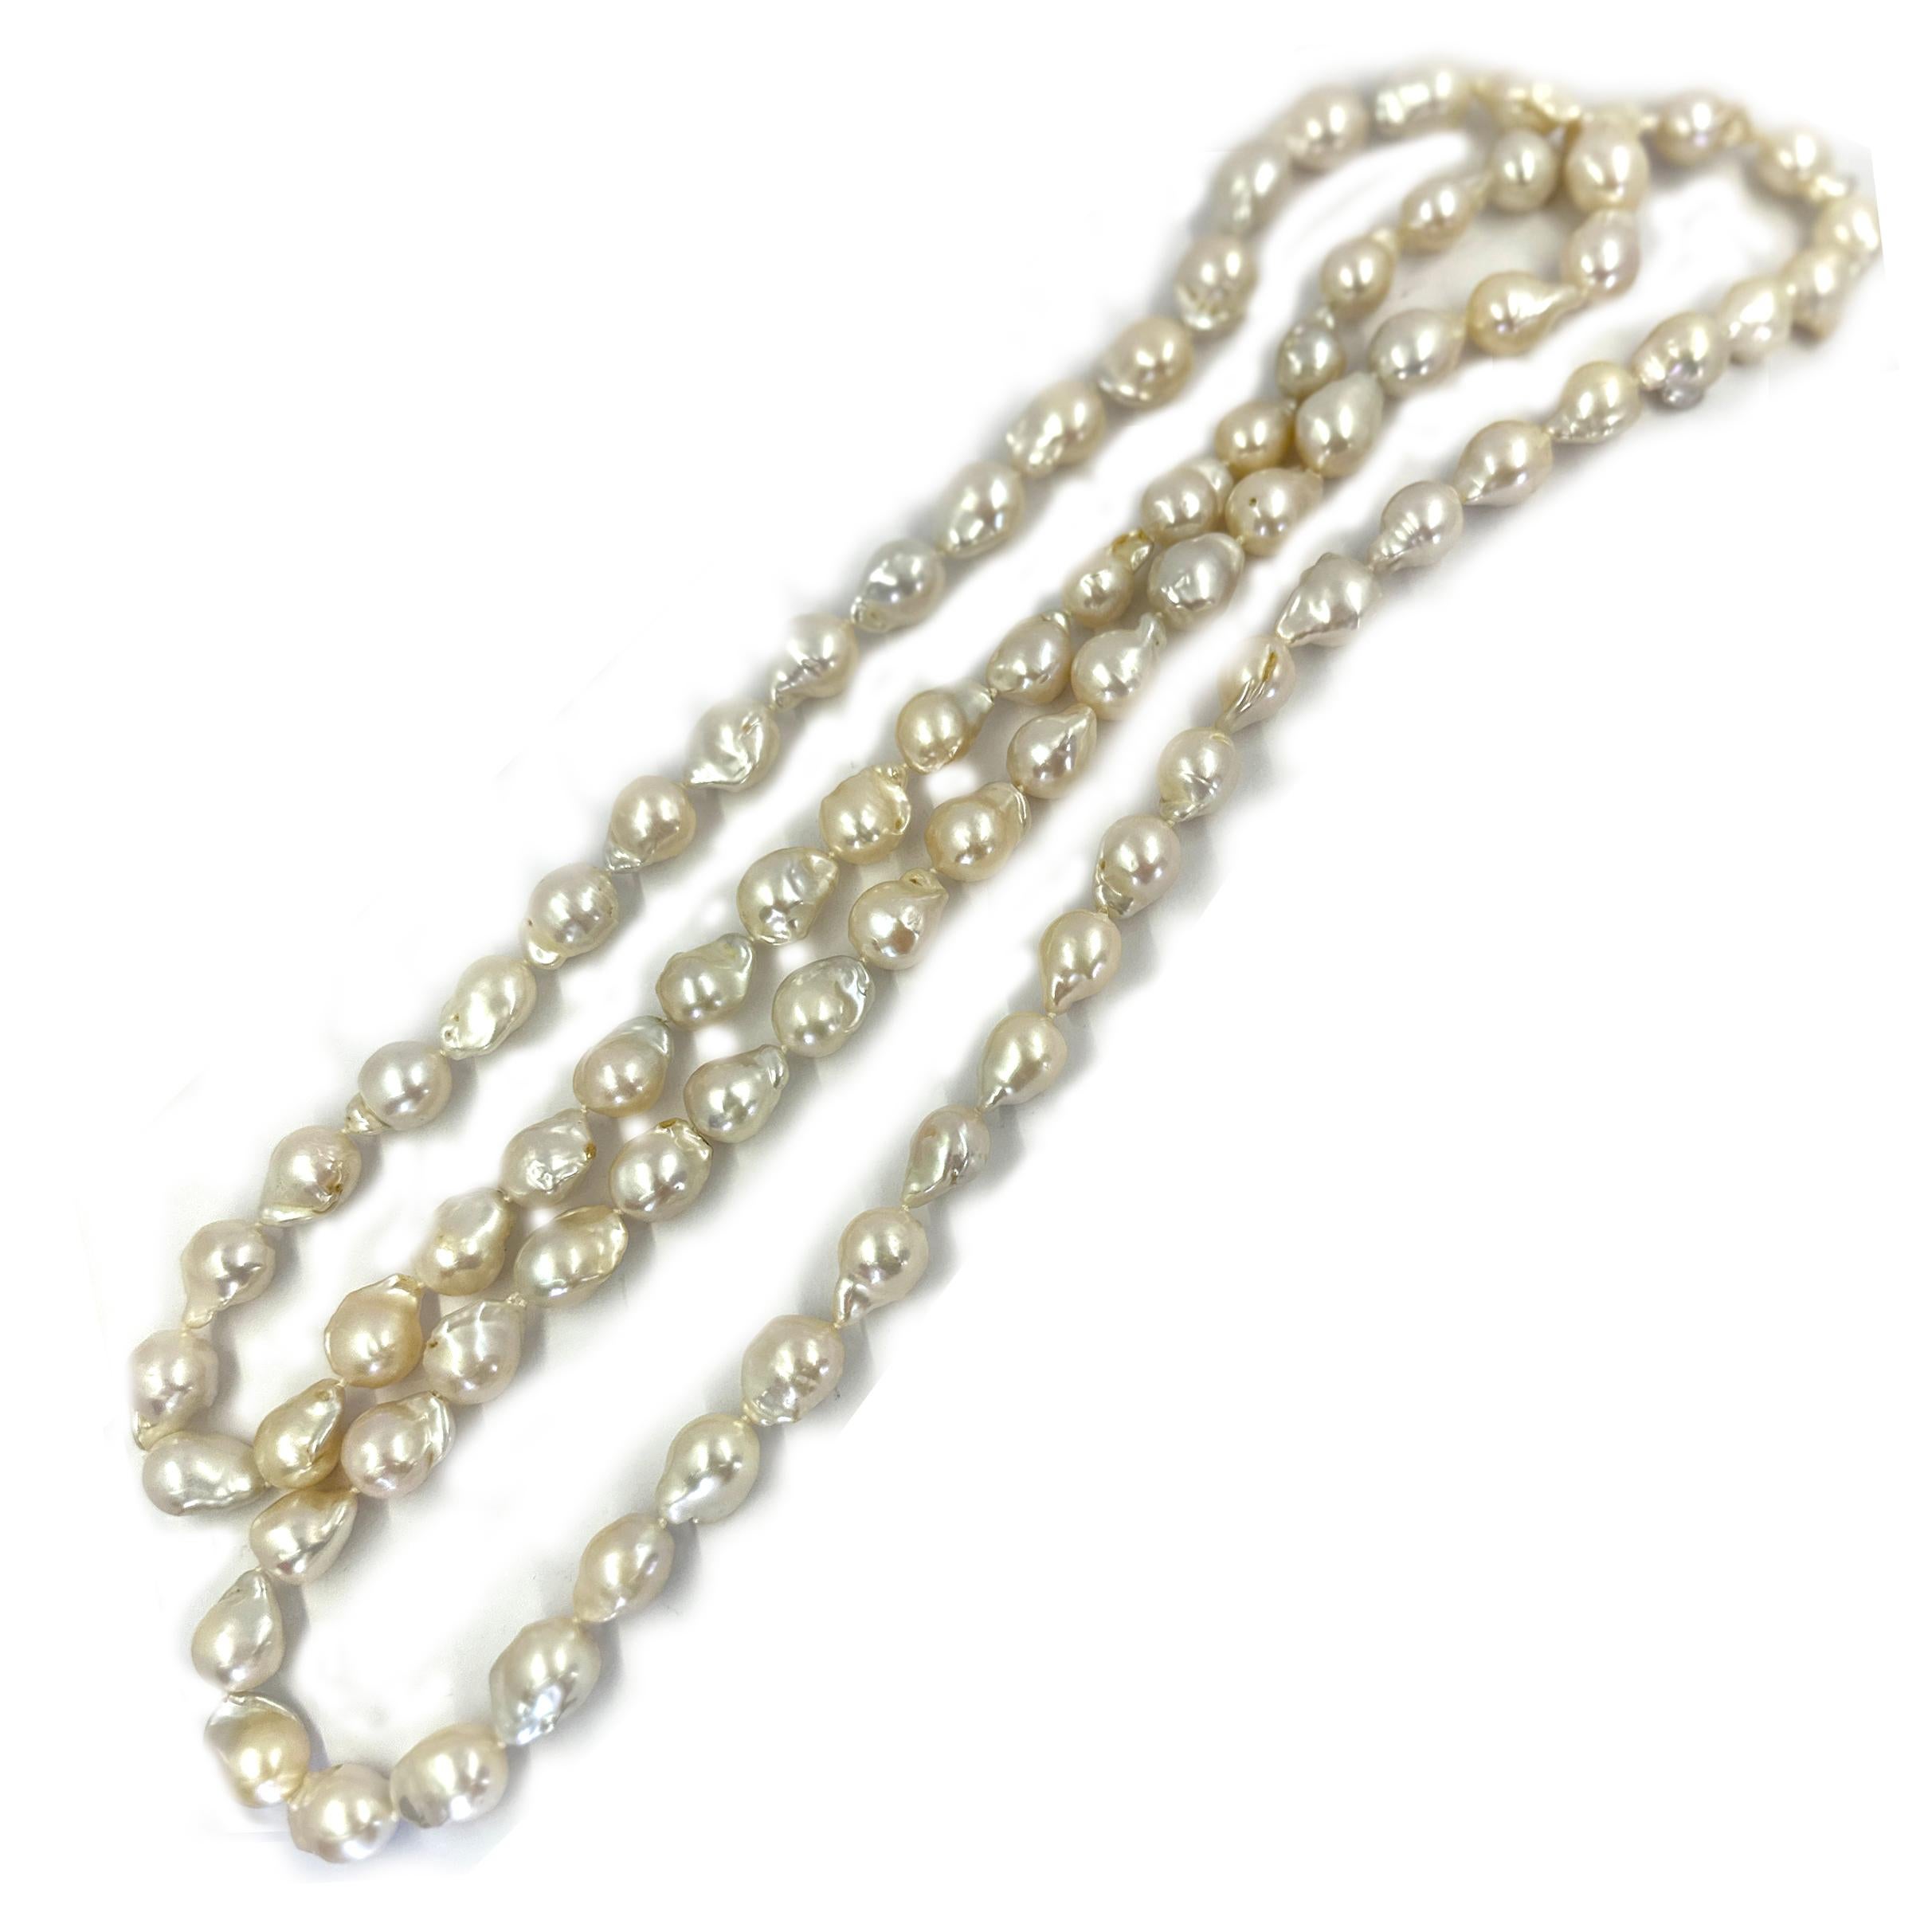 Strand of 80 Baroque Cultured Saltwater Pearls Measuring 48 Inches Long. Average Size is 11mm Each.